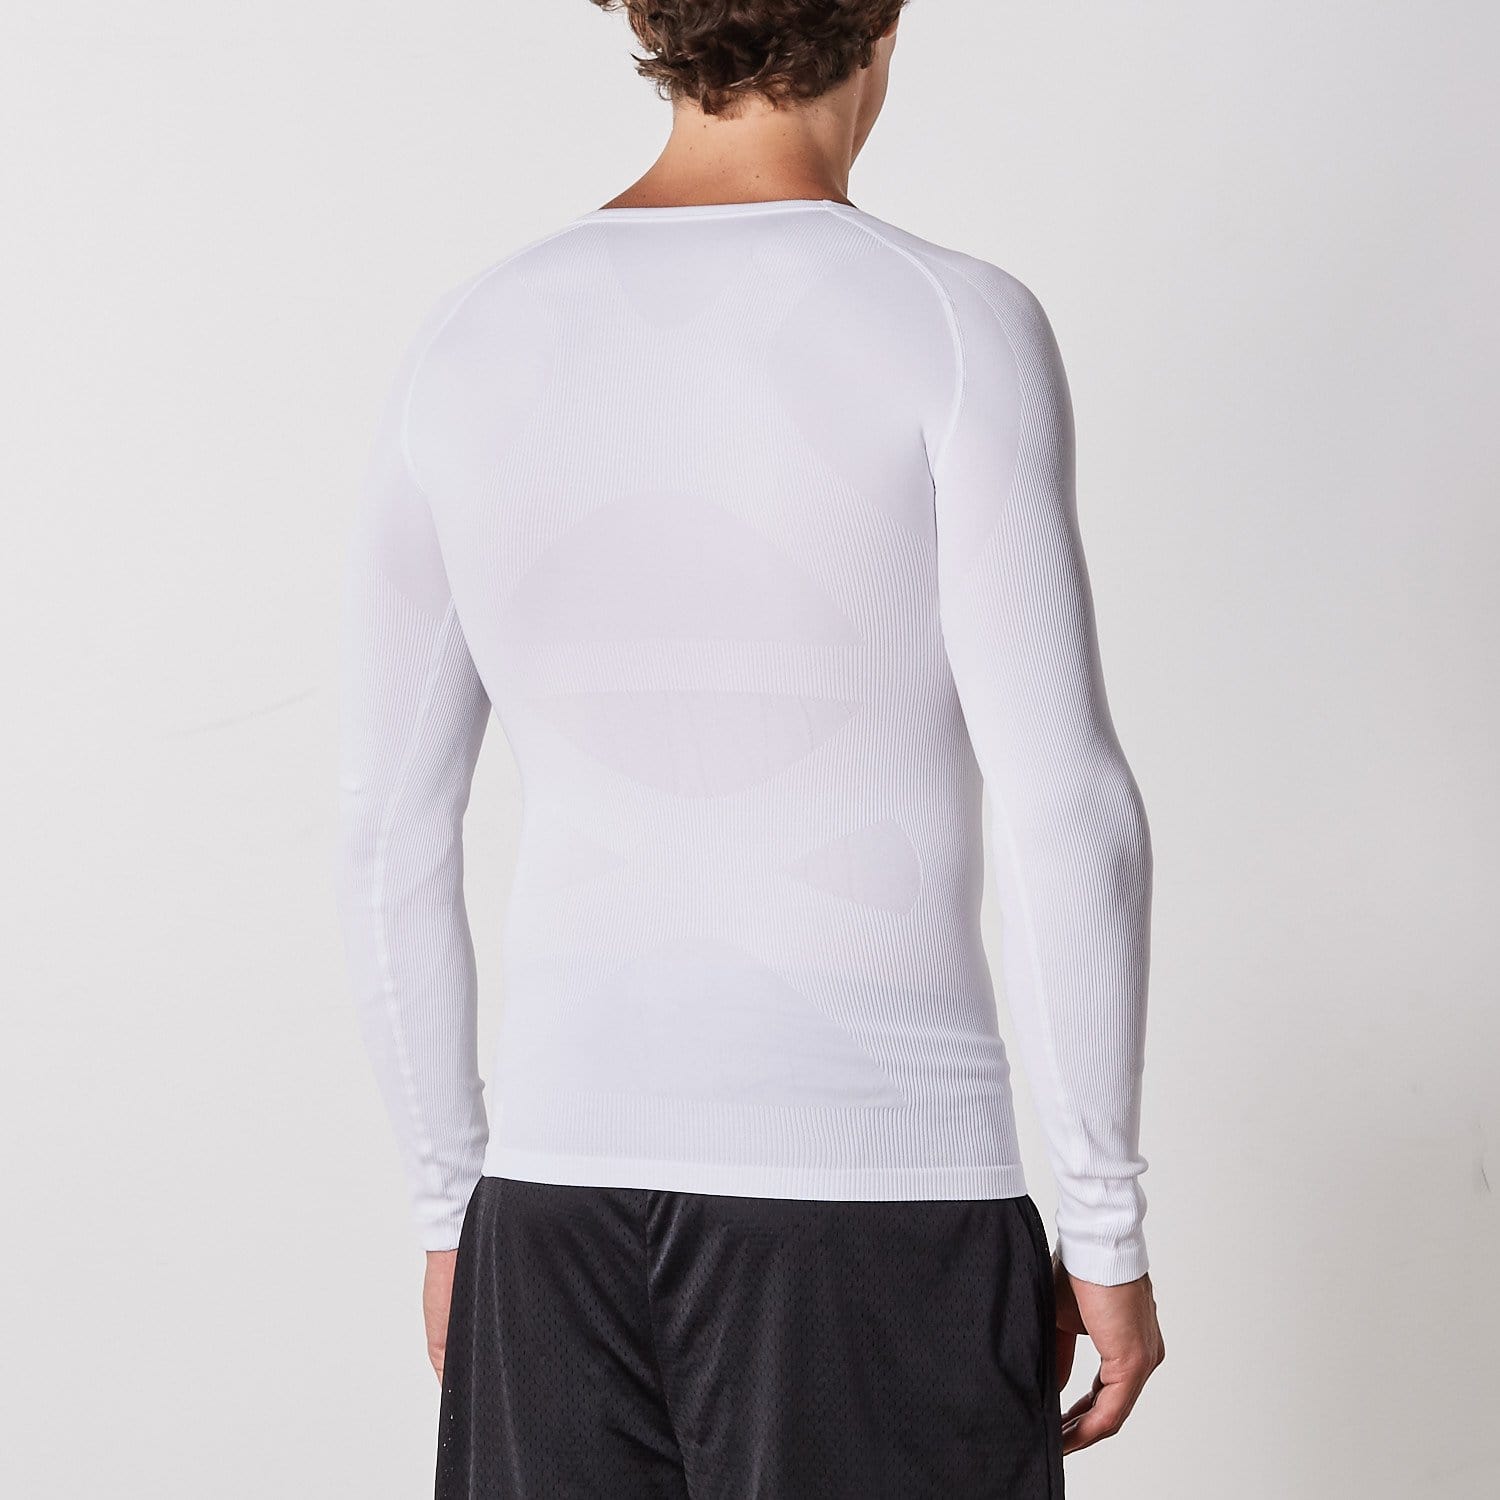 Men's Quick-Dry Long-Sleeve Shirt | Extreme Fit